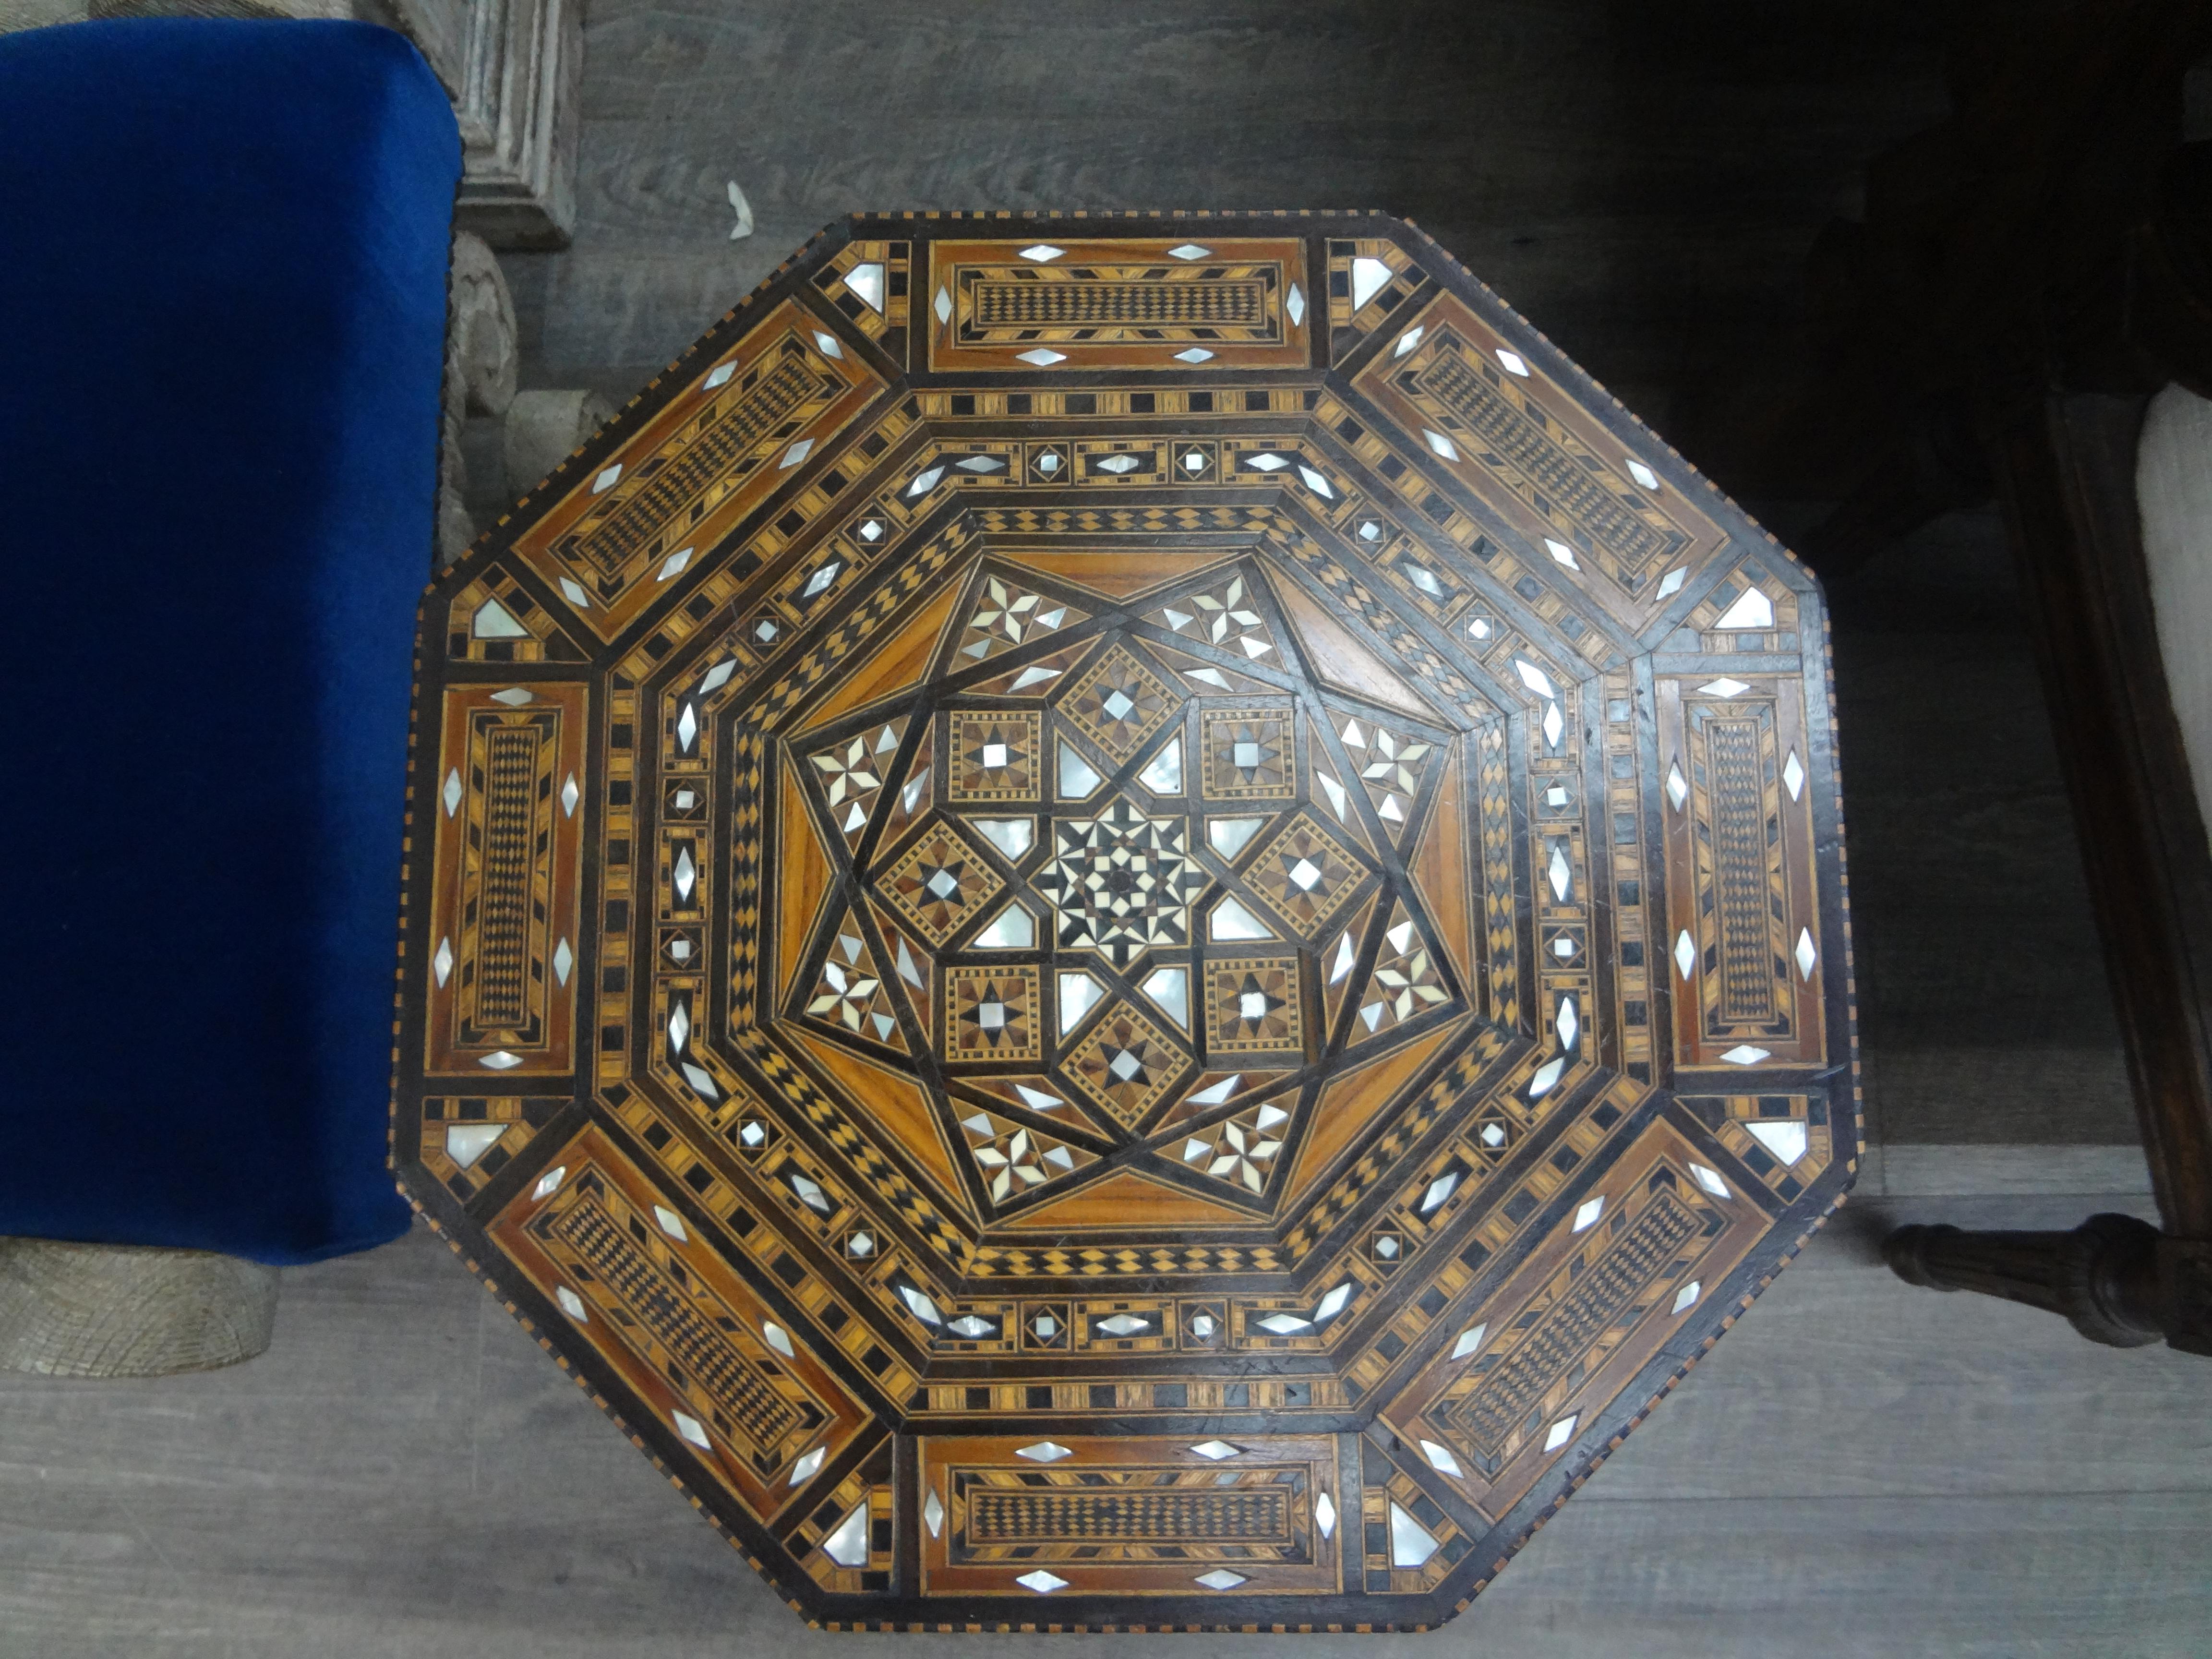 Vintage Middle Eastern Arabesque style Inlaid octagonal table.
This handsome middle eastern or Islamic Arabesque style octagonal table is inlaid with a variety of woods in a geometric pattern with mother of pearl accents. Great accent table, side